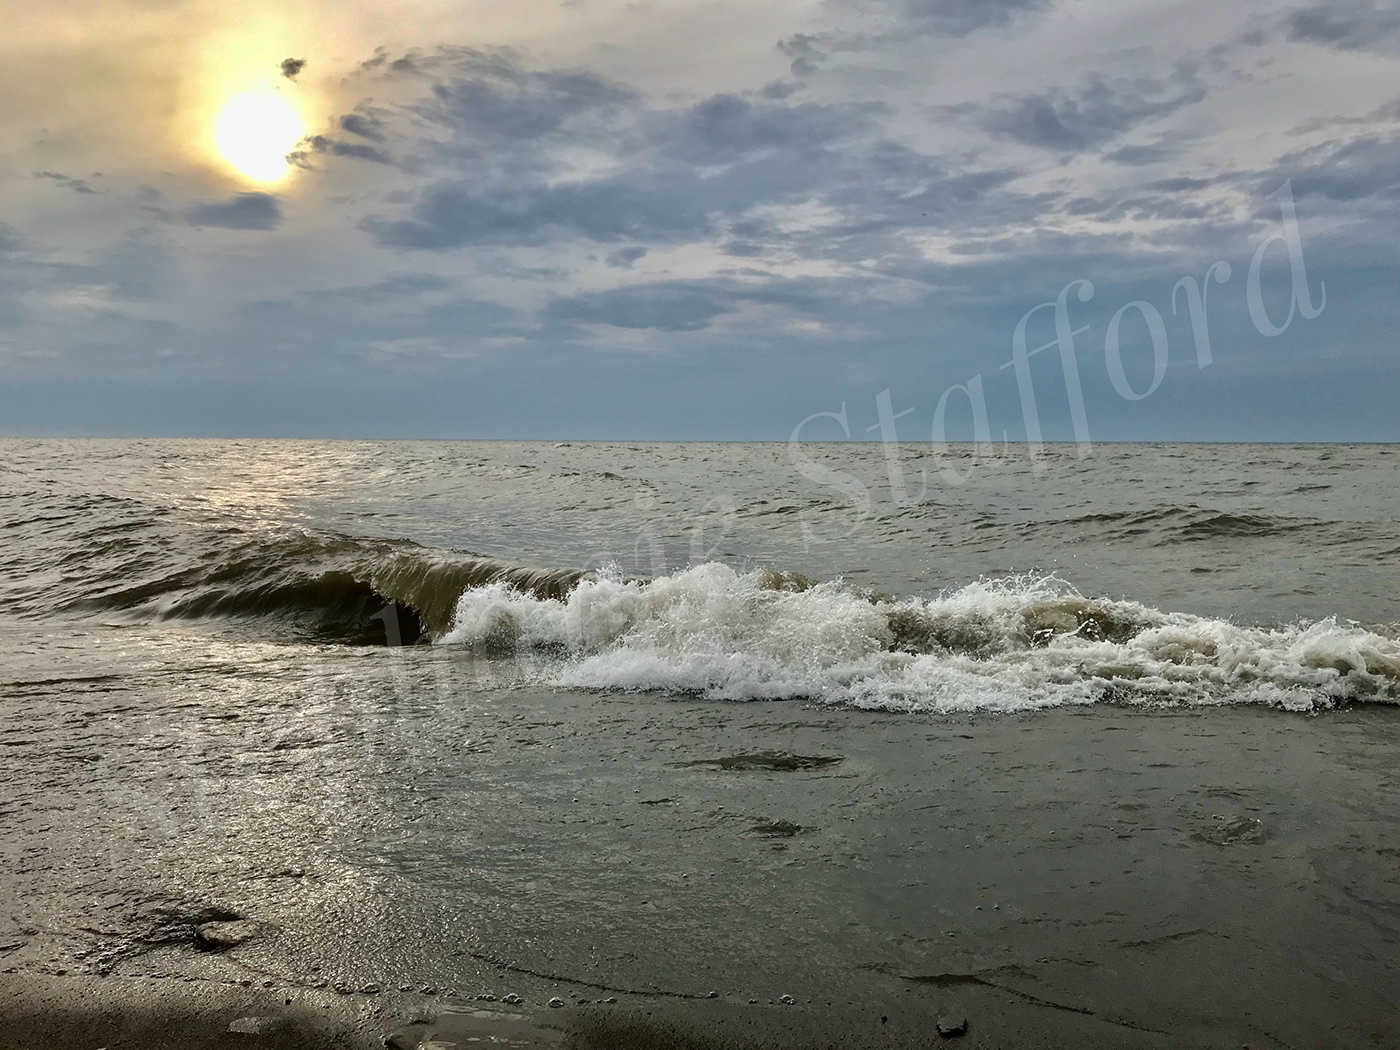 coastline weather vacation sand pier water waves splash storm waterscape light clouds seascape blue Surf shore lake beach Coast Ocean Island view stormy SKY scenic scenery Outdoor Nature Landscape horizon cloudy background bay harbor dock sea Seaside